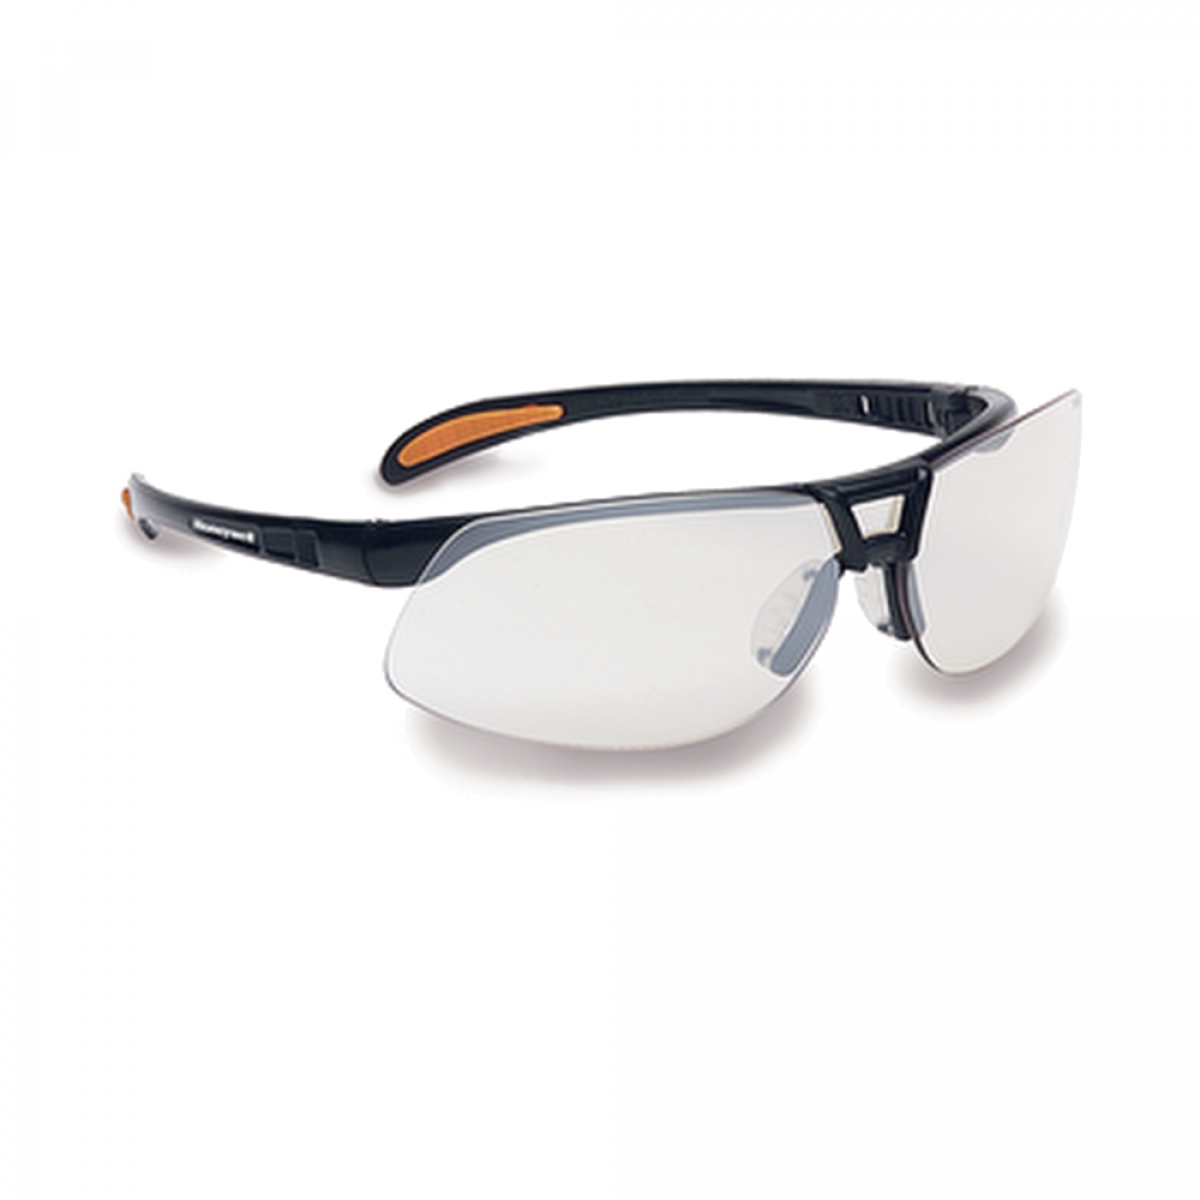 Honeywell Protege Glasses for PPE